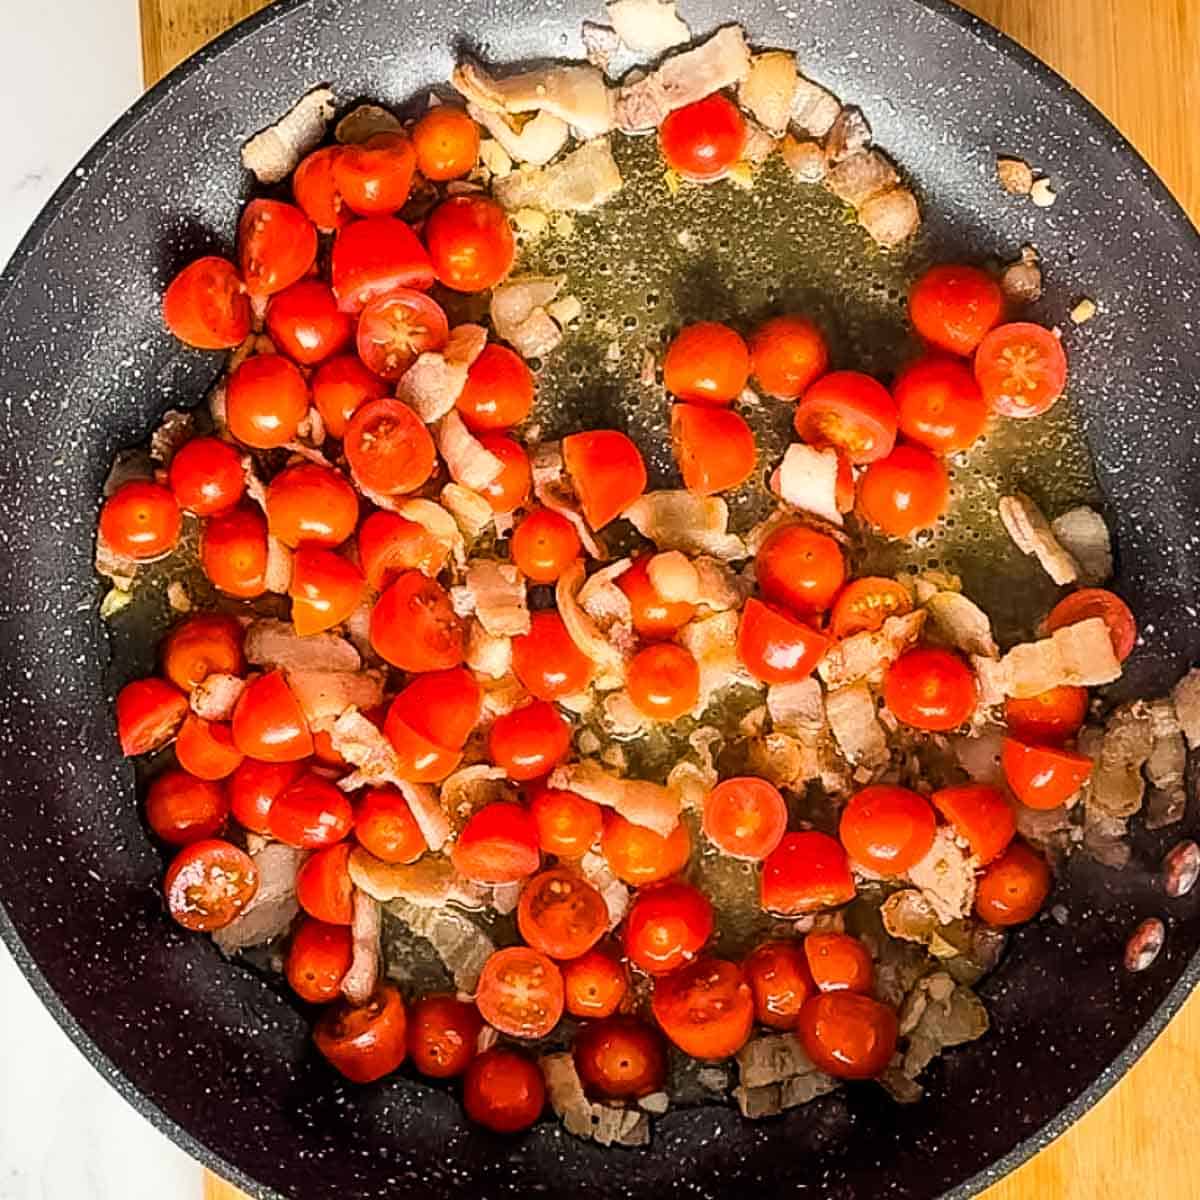 vodka, halved cherry tomatoes, bacon, and garlic cooking in pan.